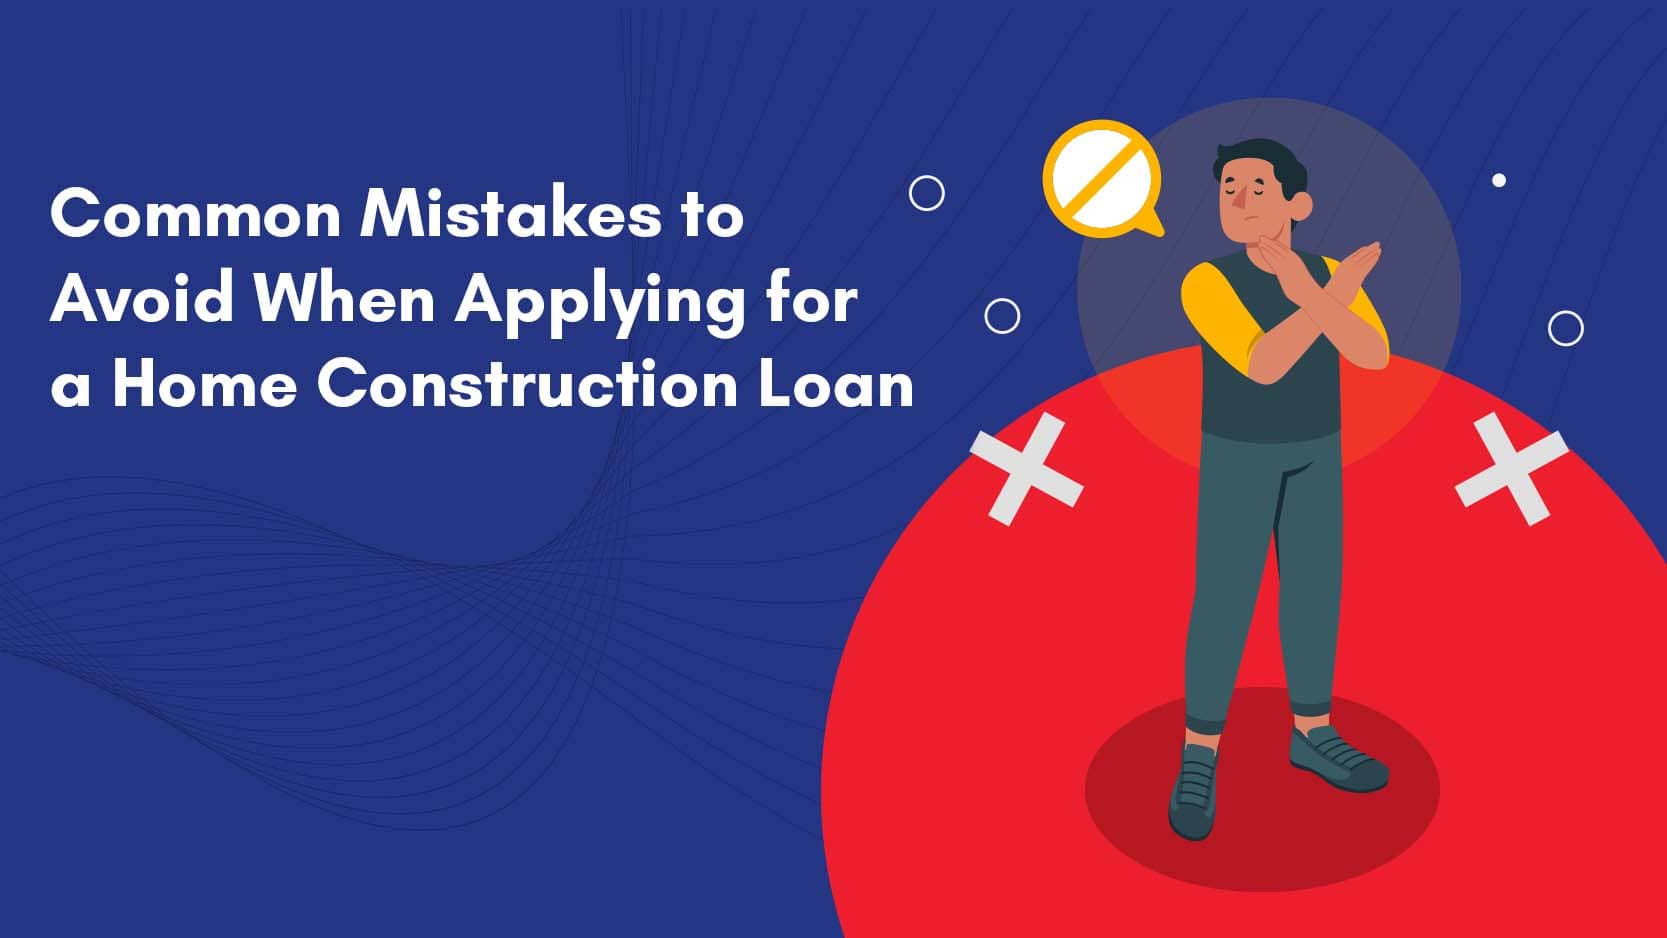 Common Mistakes to Avoid When Applying for a Home Construction Loan